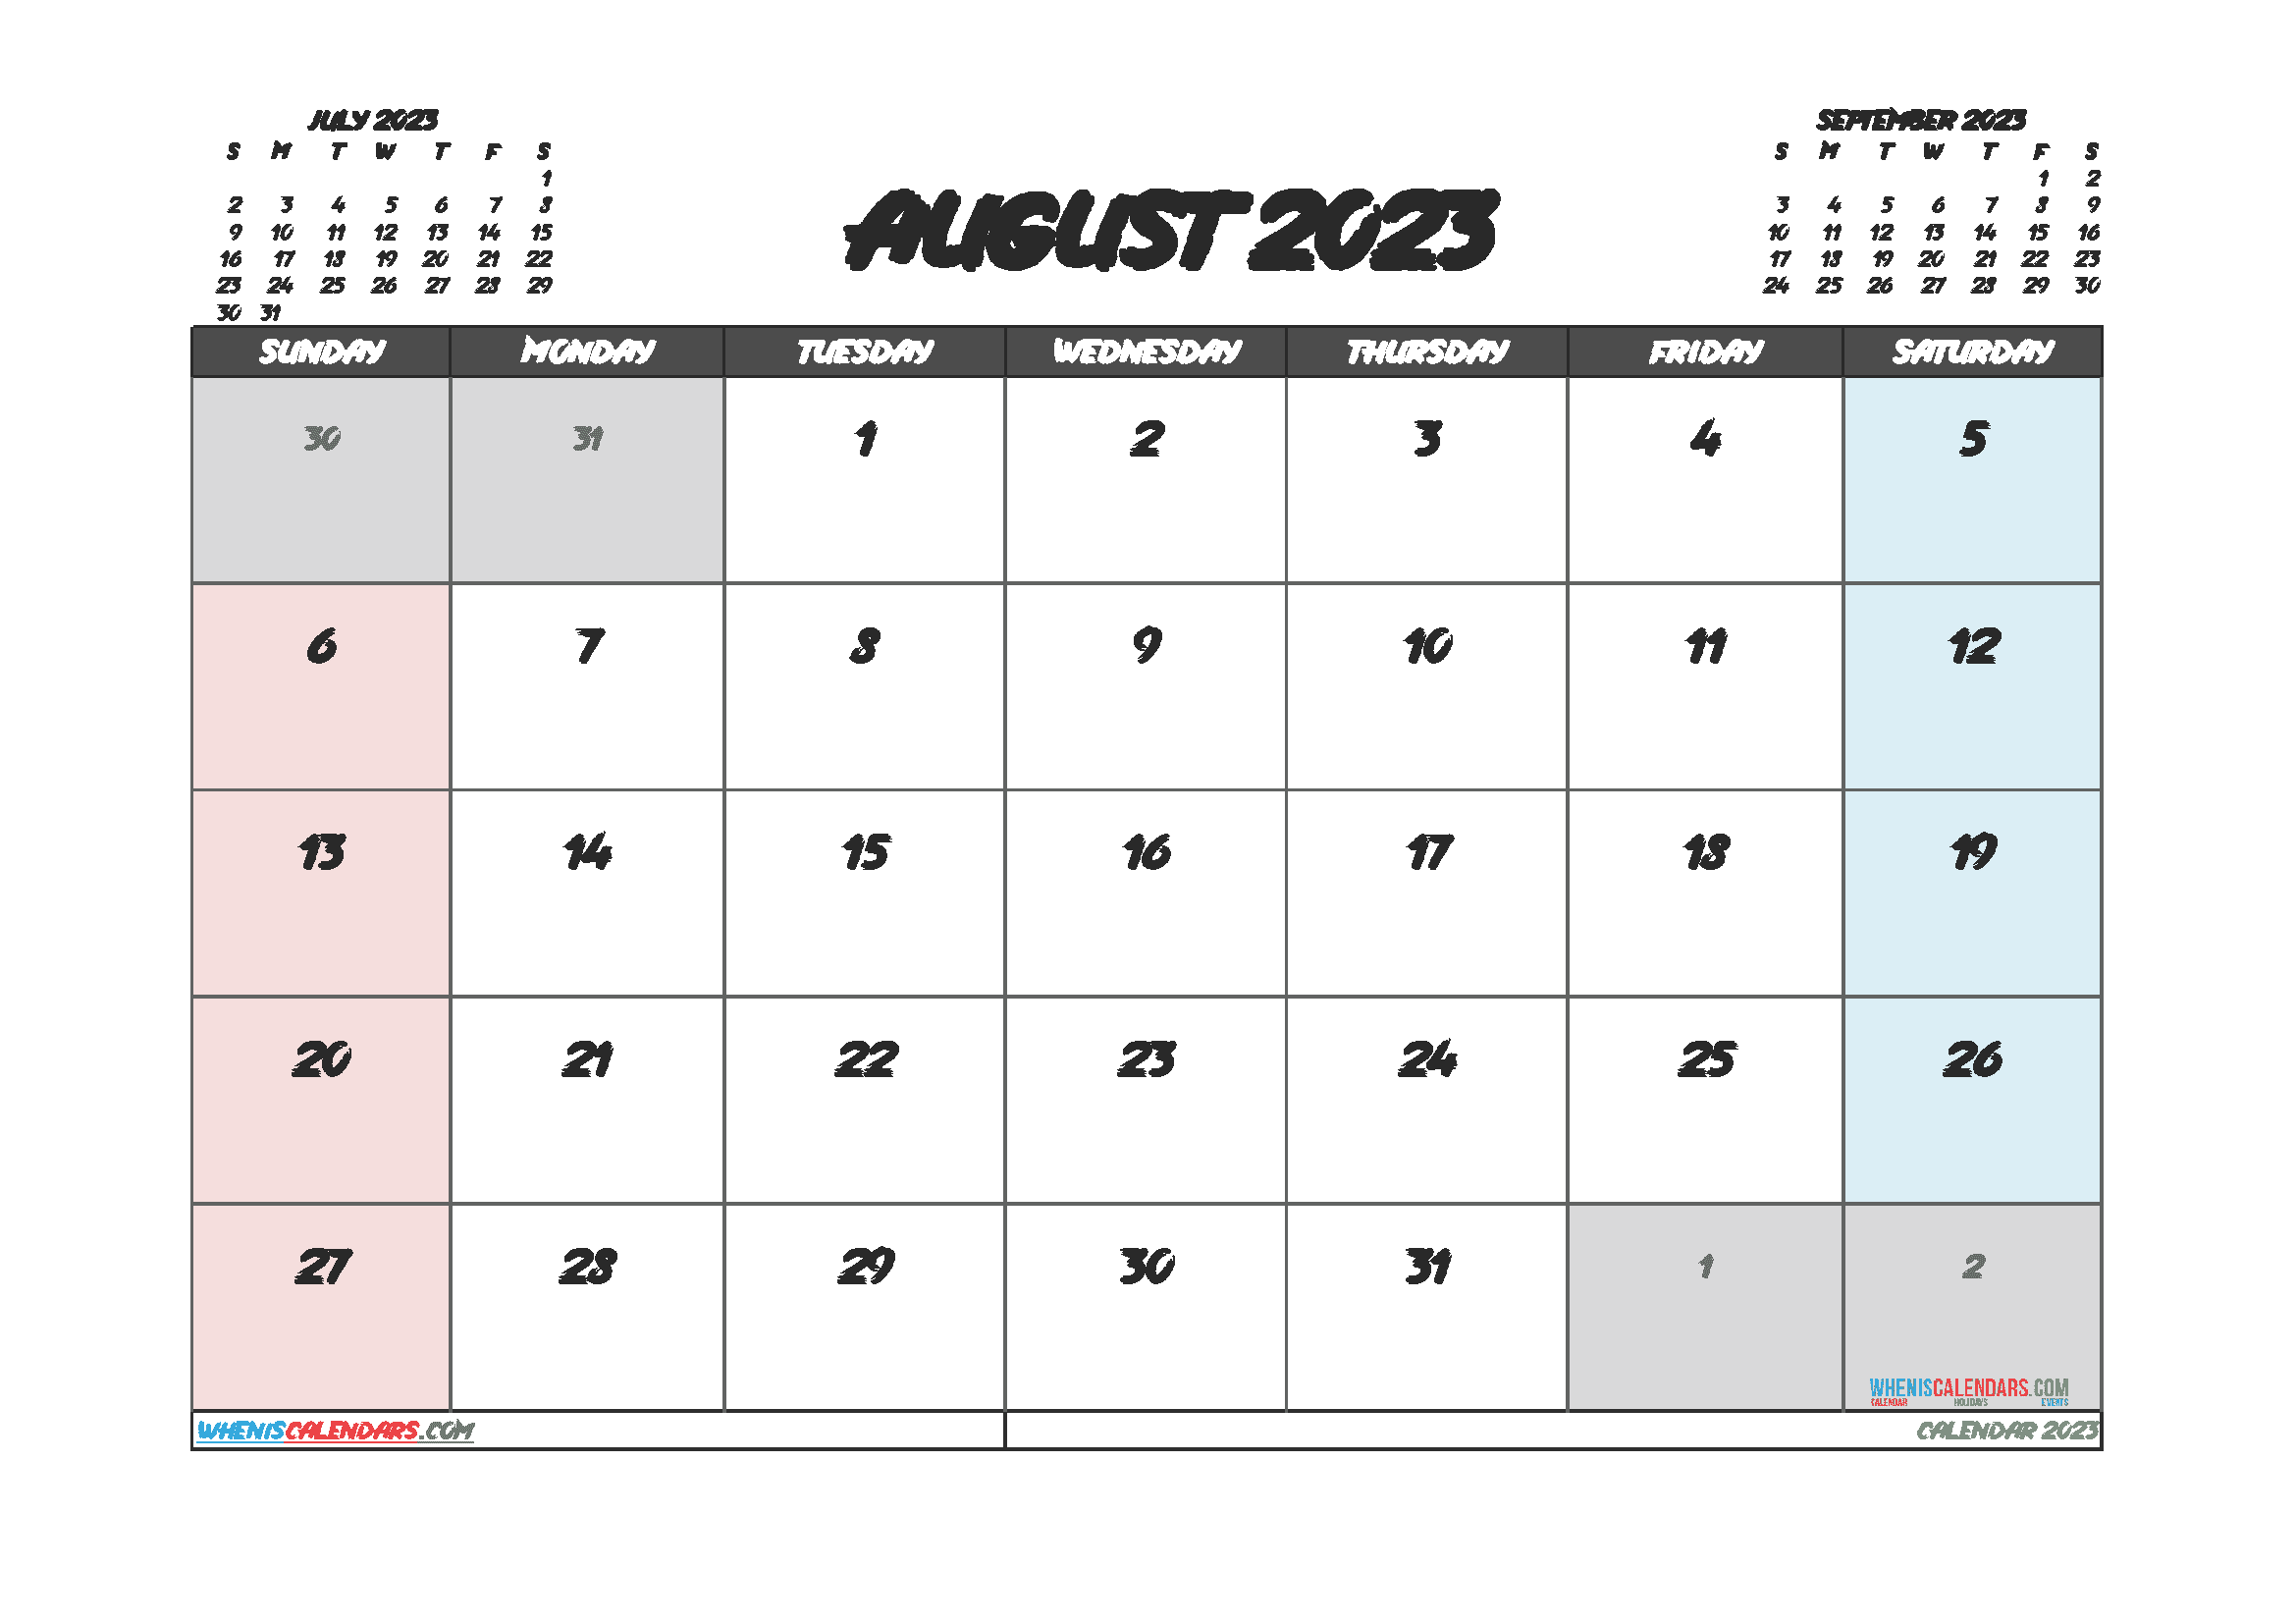 Downloadable August 2023 Calendar with Holidays Printable Free PDF in Landscape